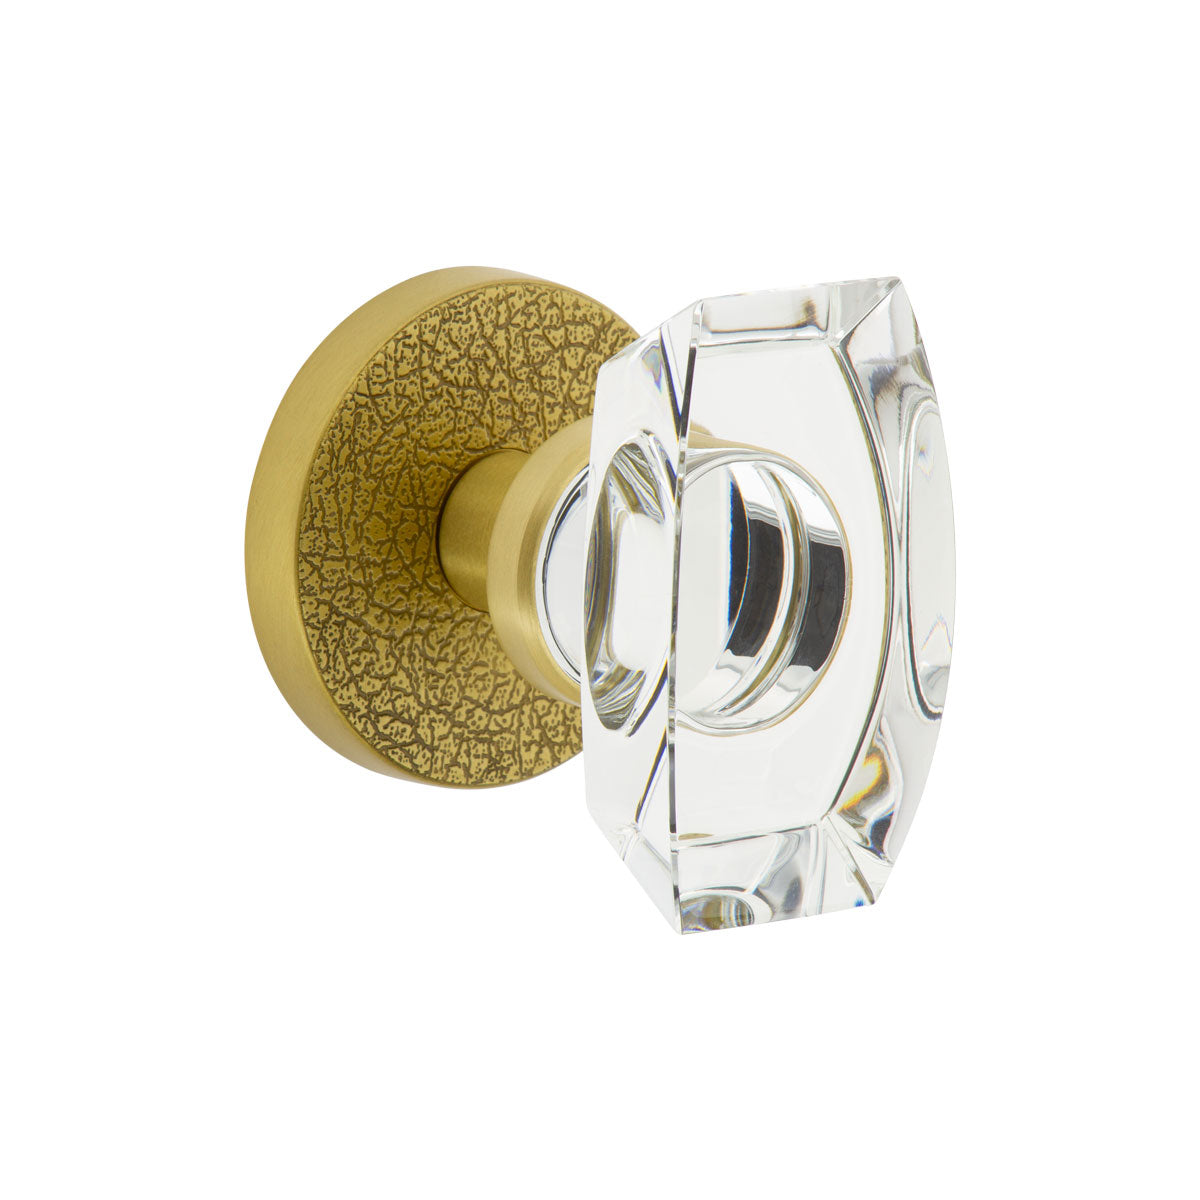 Circolo Leather Rosette with Stella Crystal Knob in Satin Brass